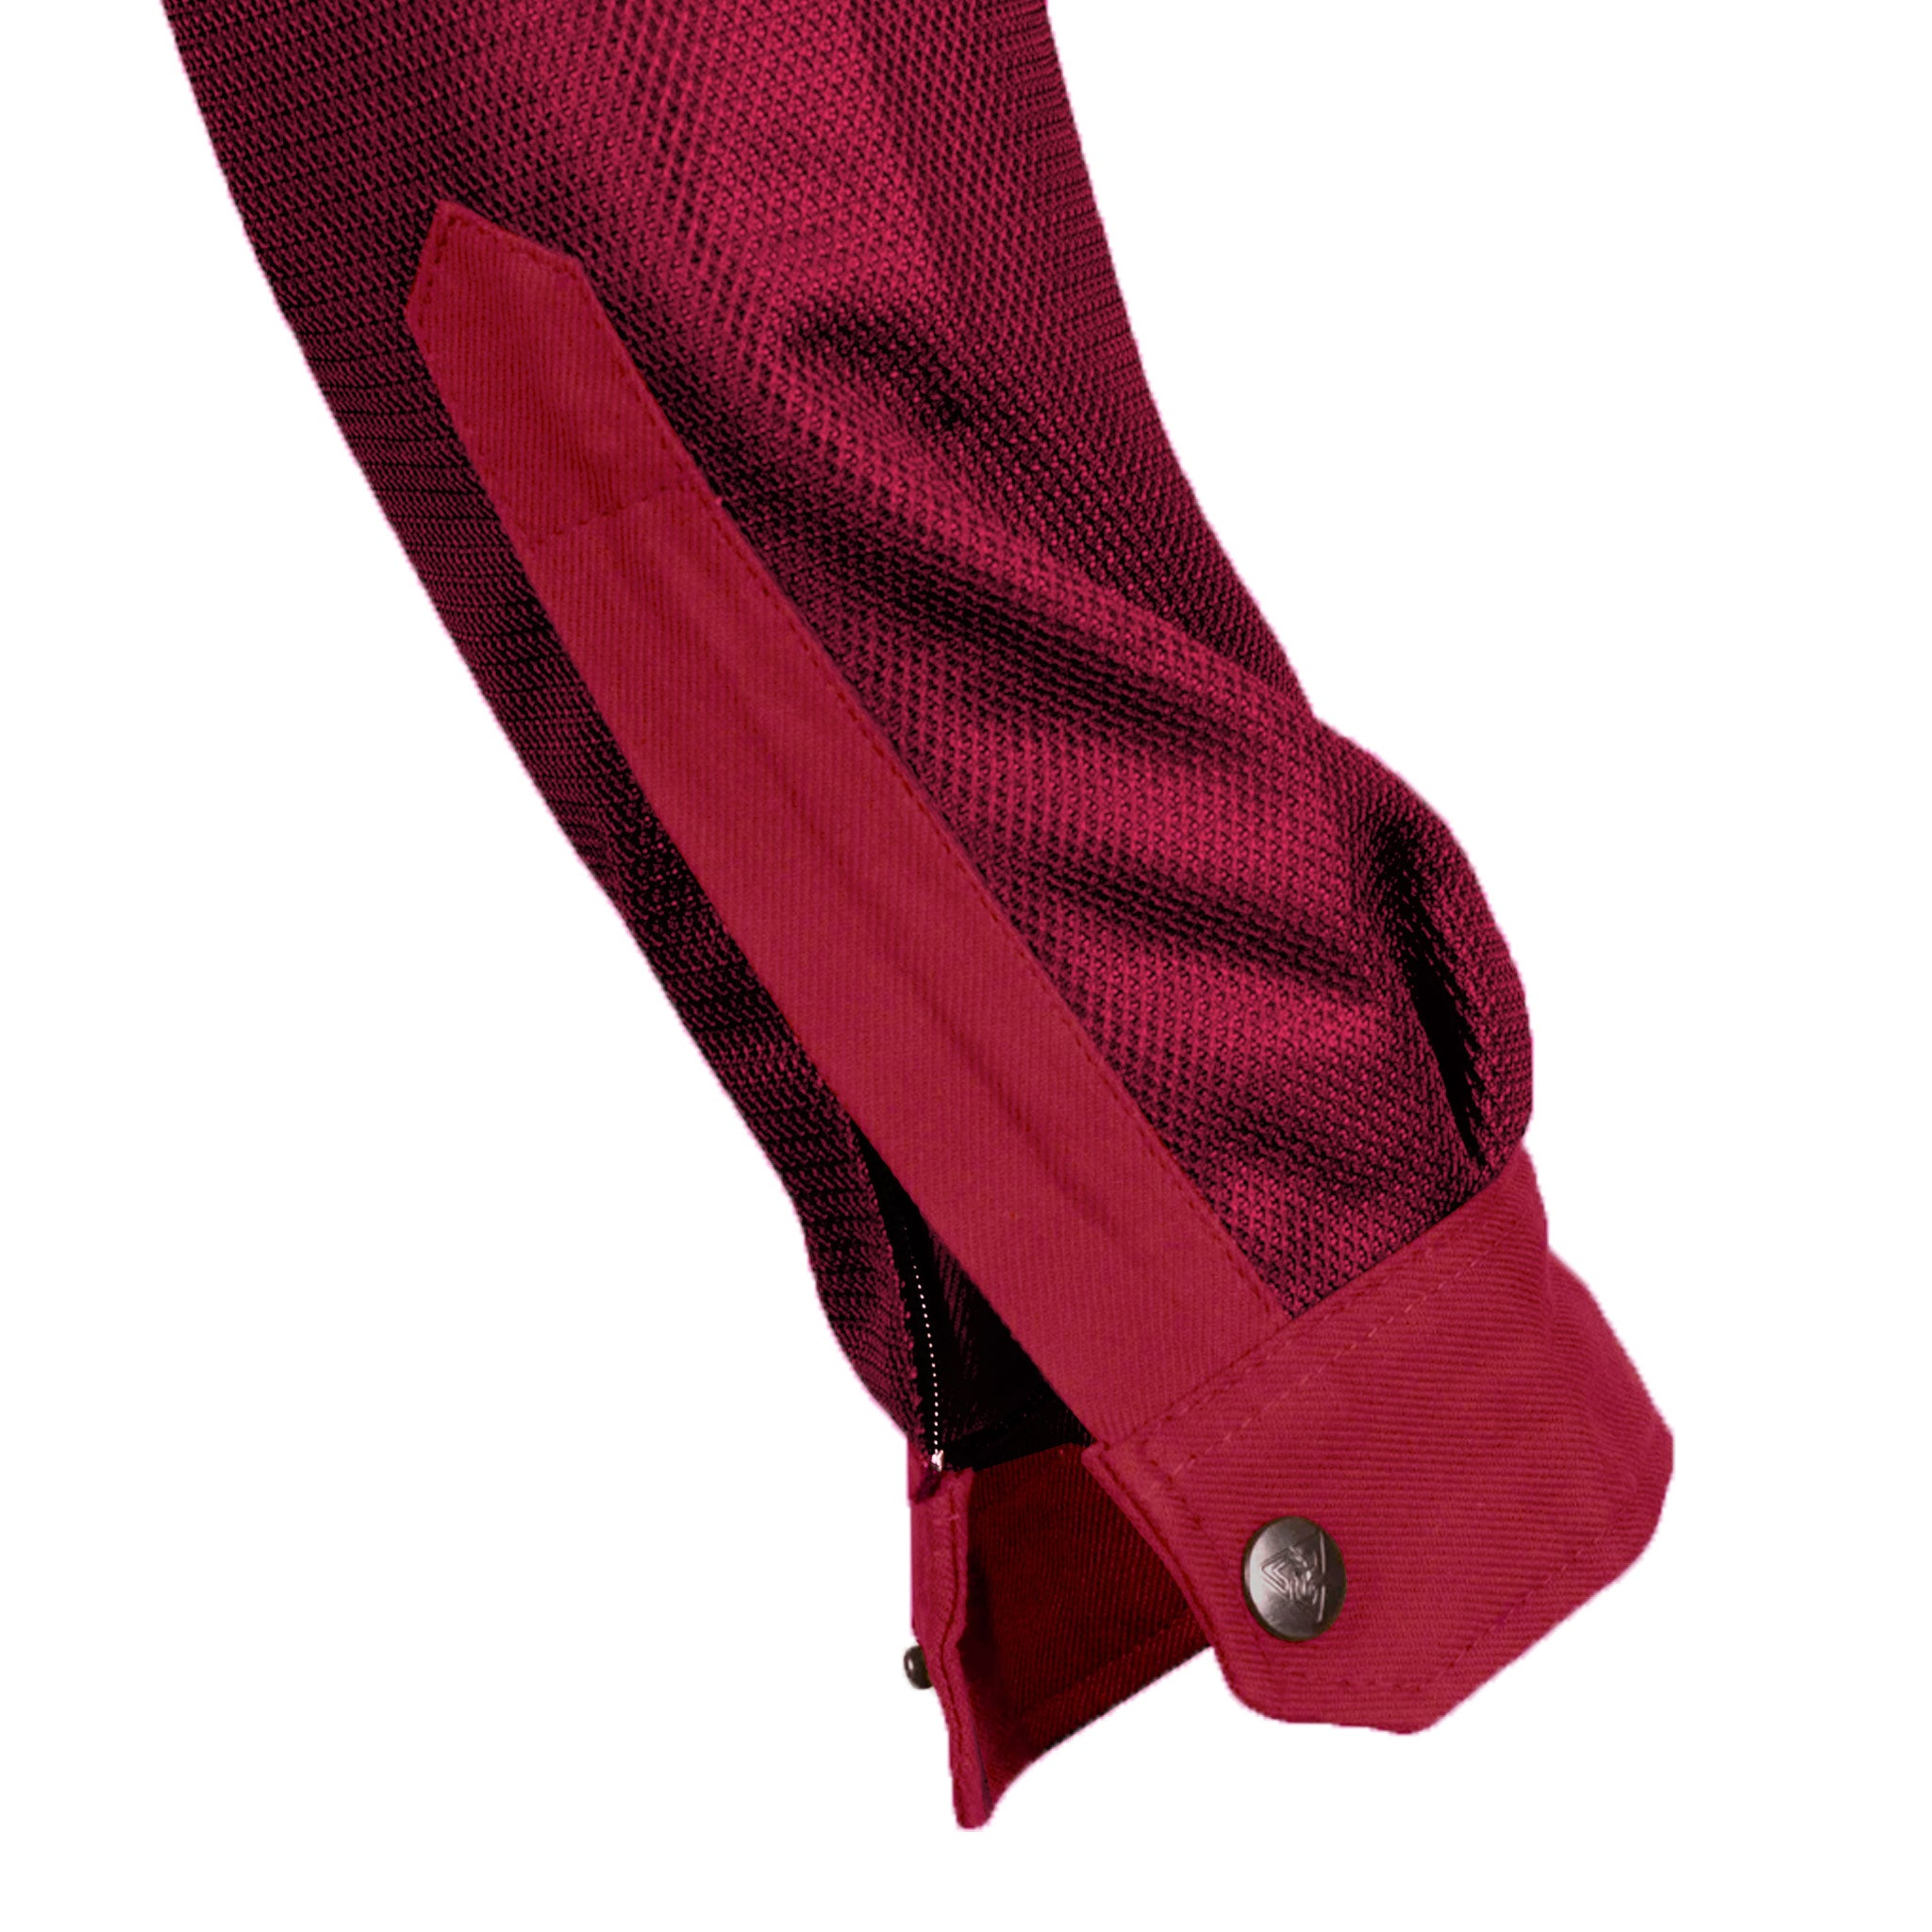 Right-Sleeve-in-Red-Maroon-Solid